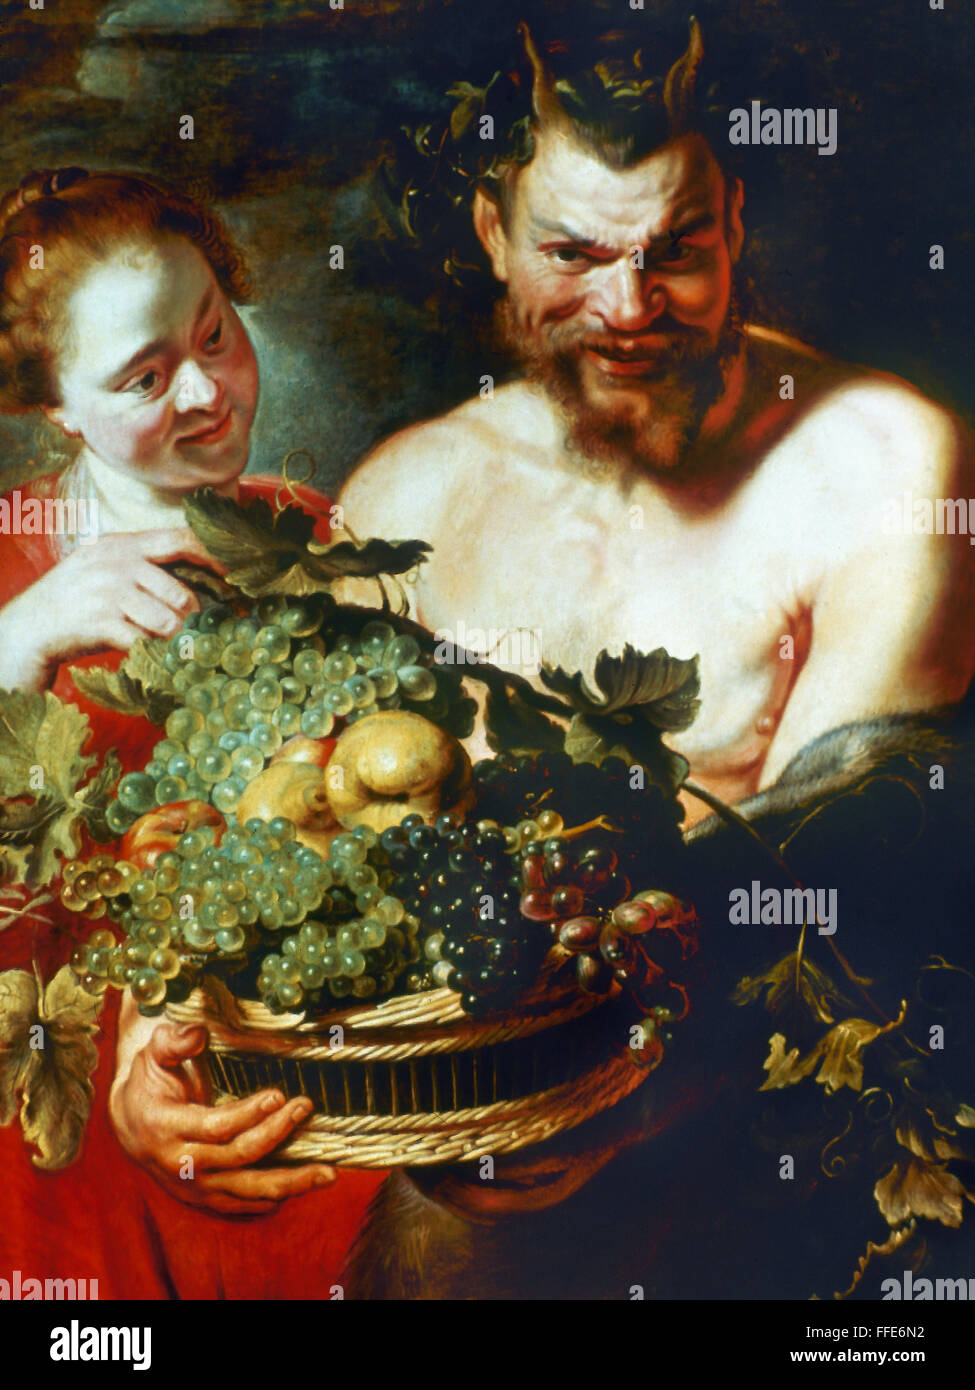 RUBENS: FAUN AND NYMPH. /nOil on canvas by Peter Paul Rubens (1577-1640). Stock Photo